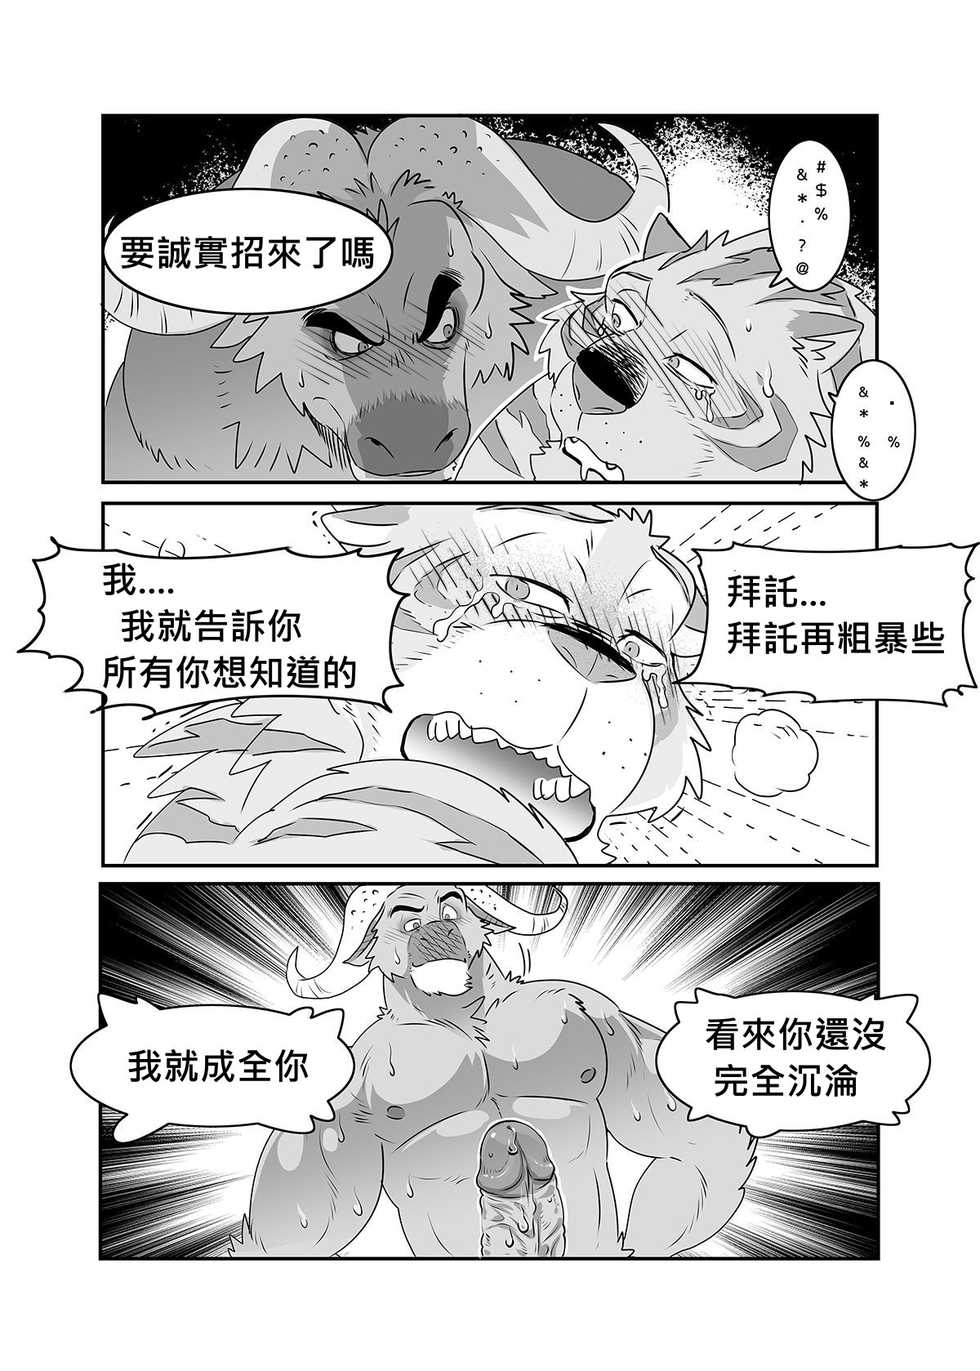 [Kuma Hachi] chief bogo found a dirty police (fixed version) [Chinese] - Page 14